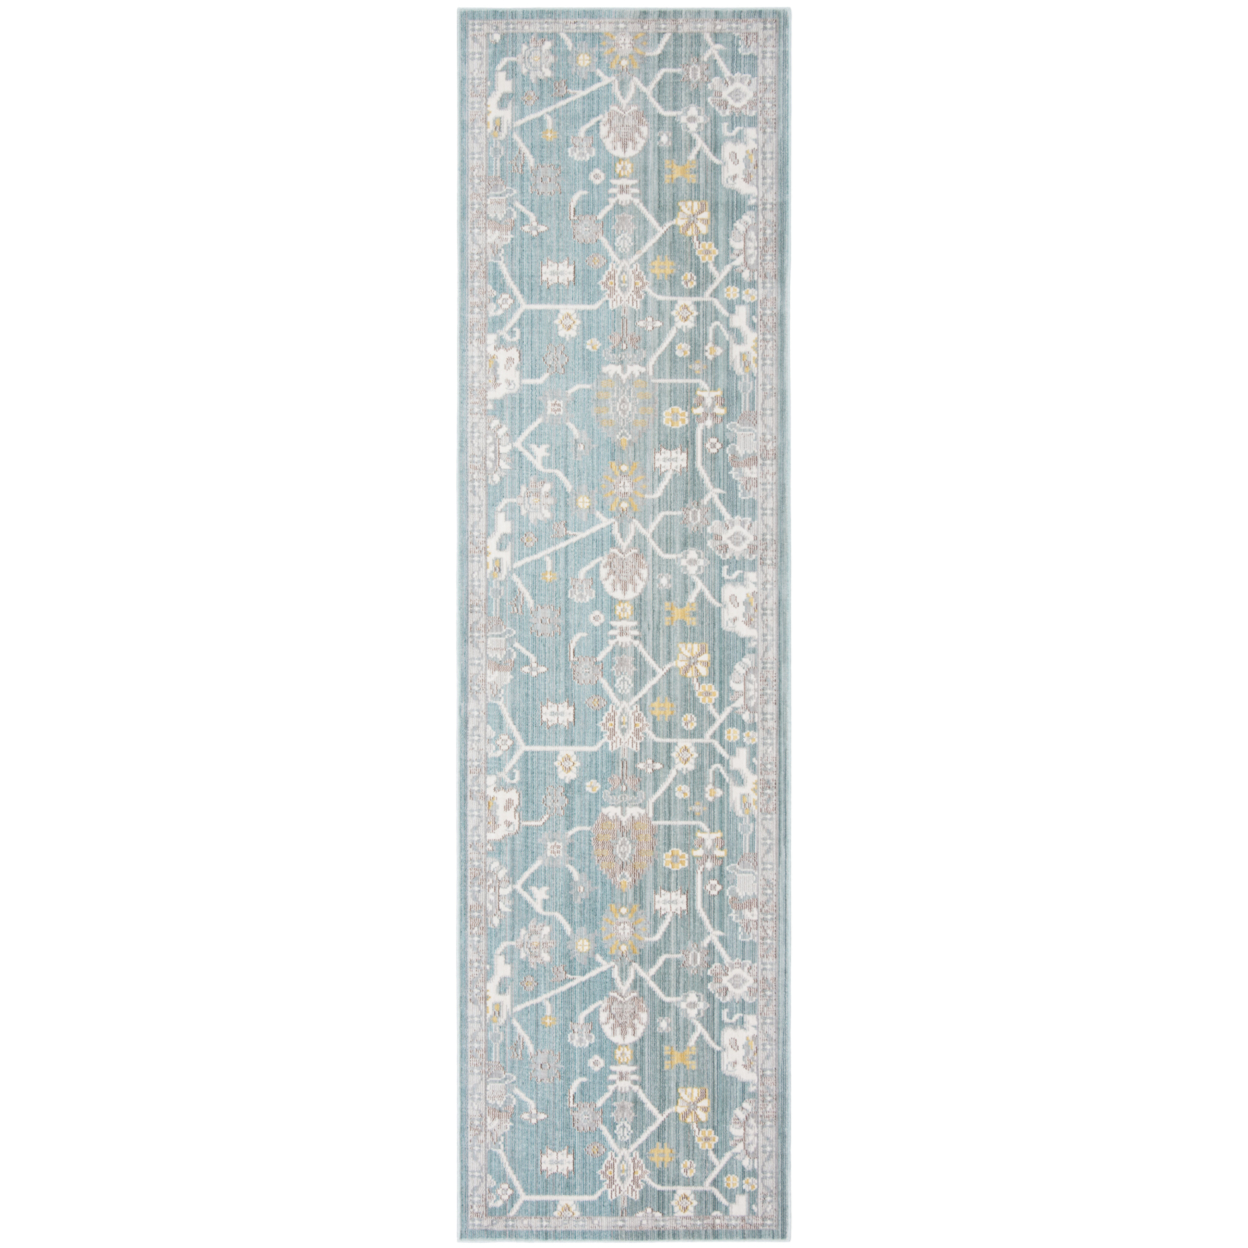 SAFAVIEH Valencia Collection VAL116S Steel Blue Rug - 9' X 12'